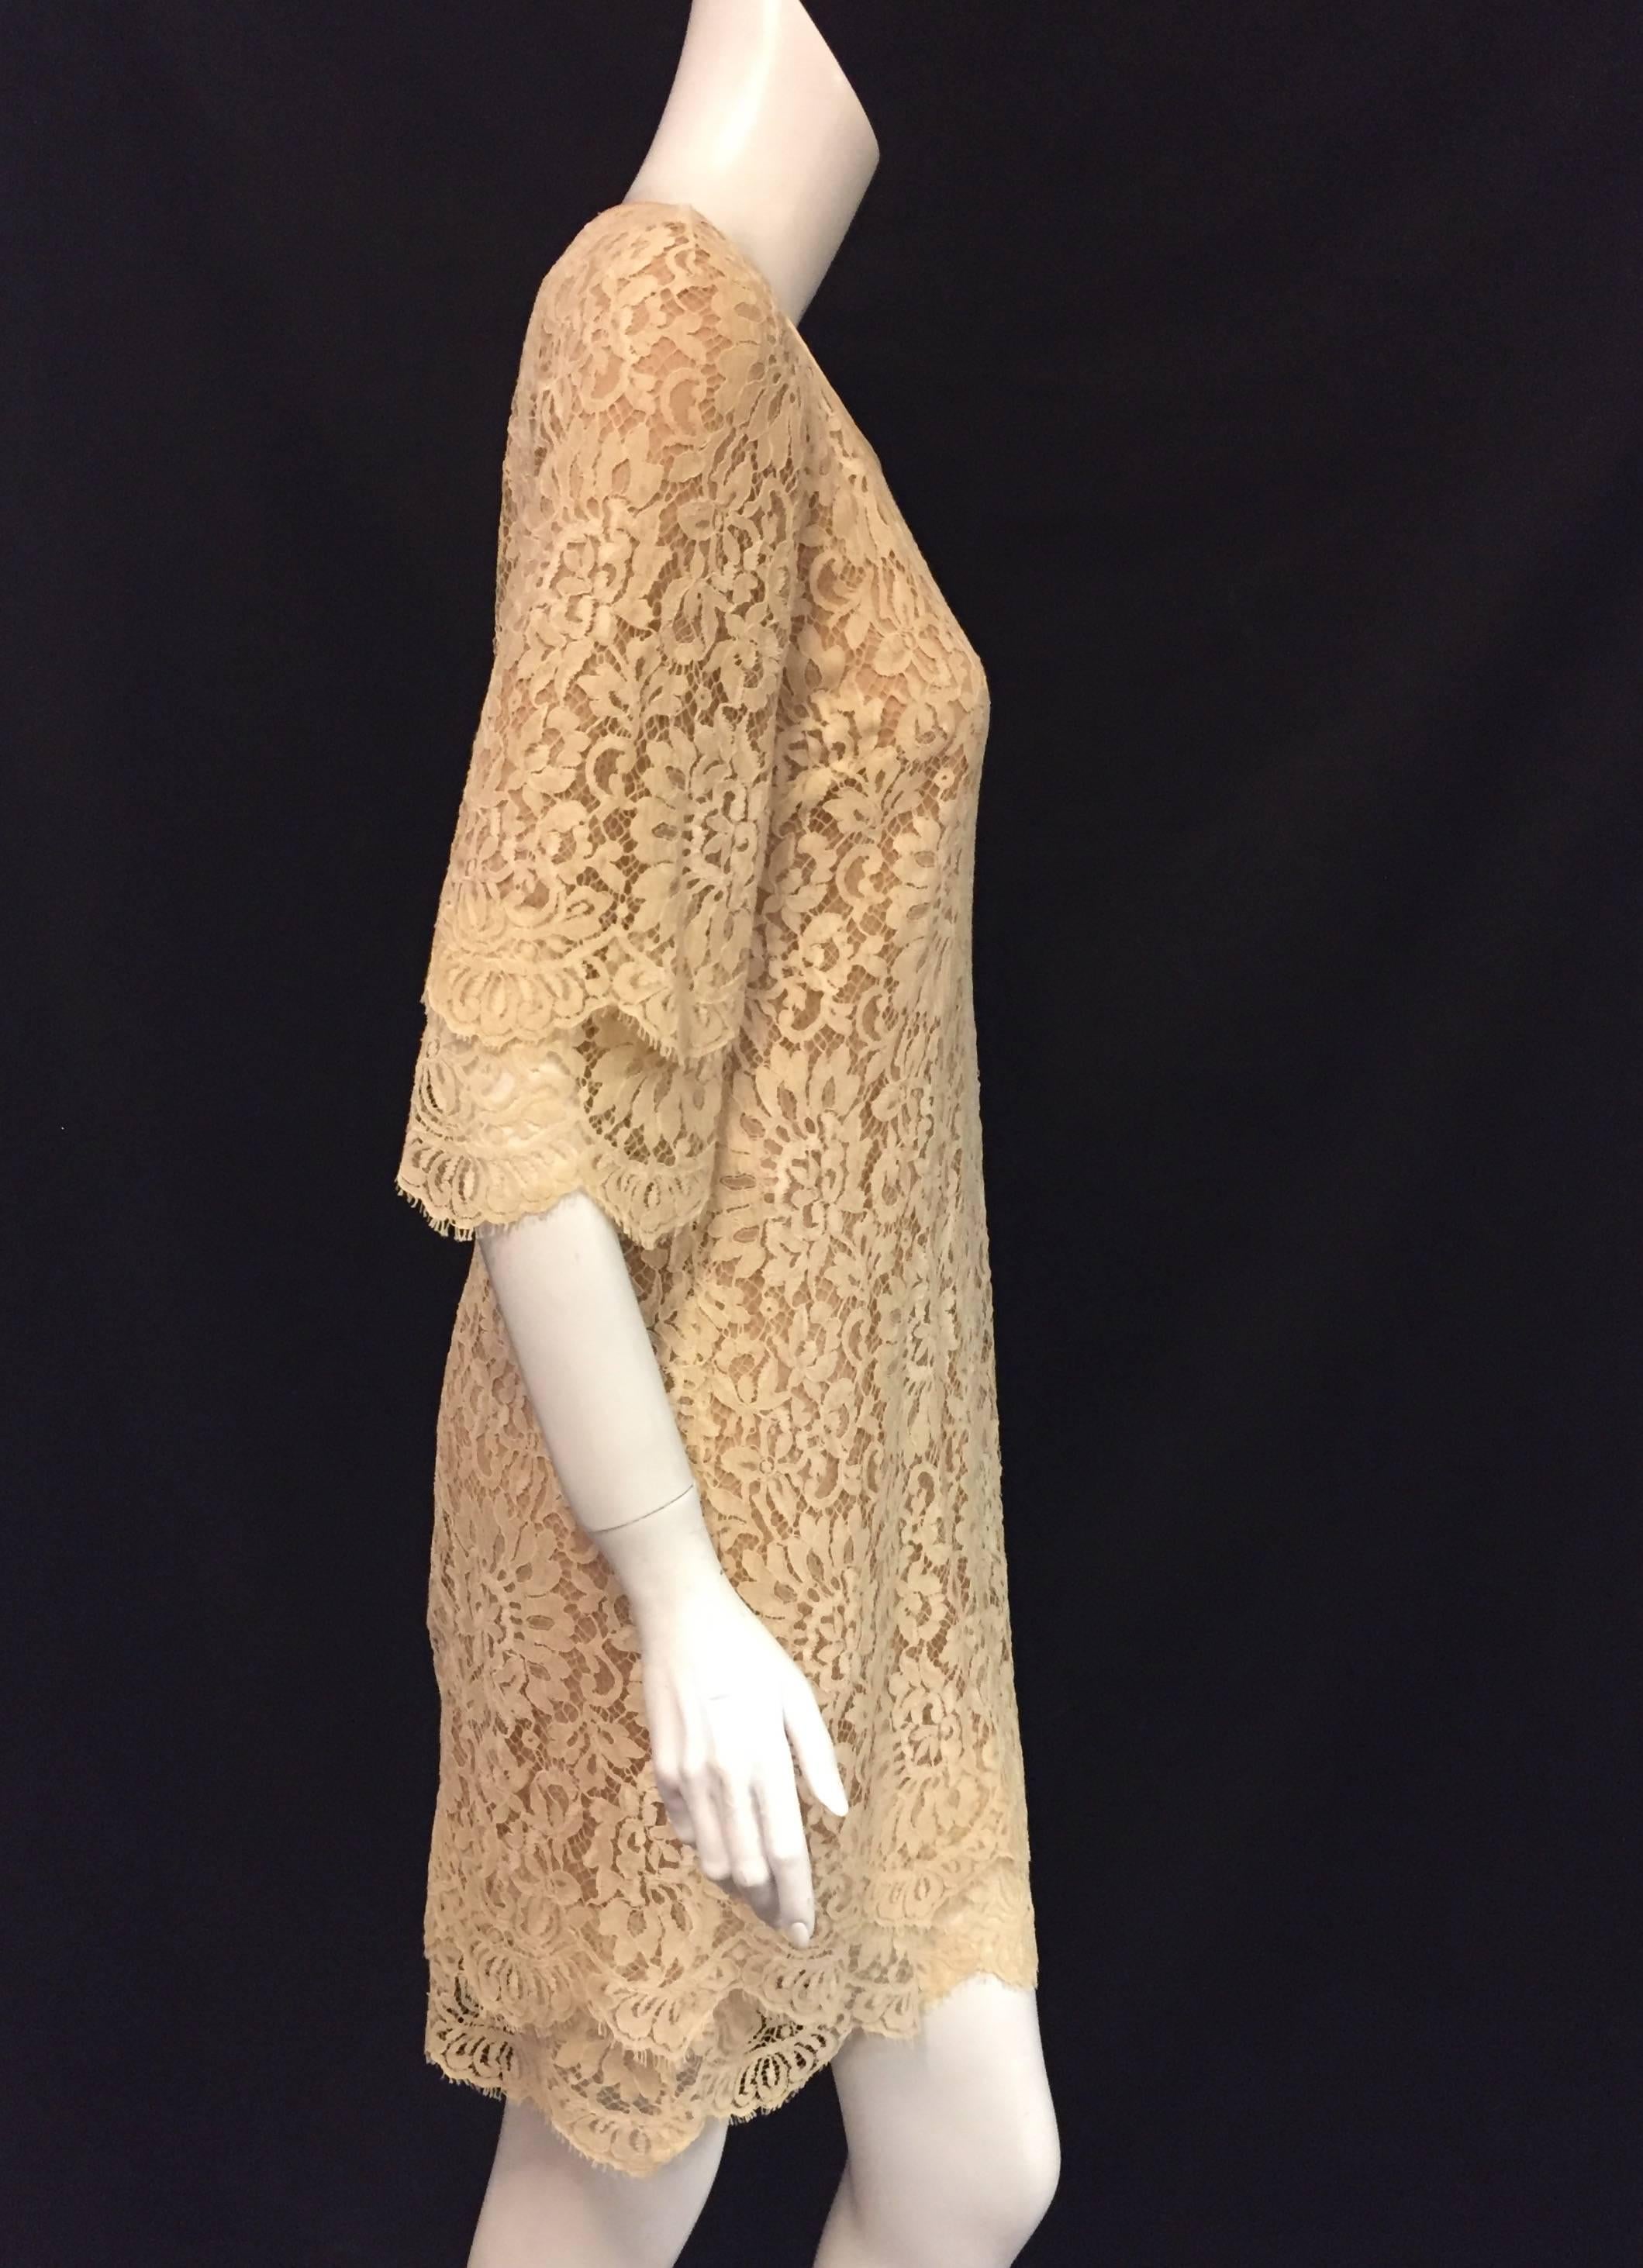 Modern Michael Kors Beige Lace Dress With Double Layer Cuffs and Hem For Sale 2